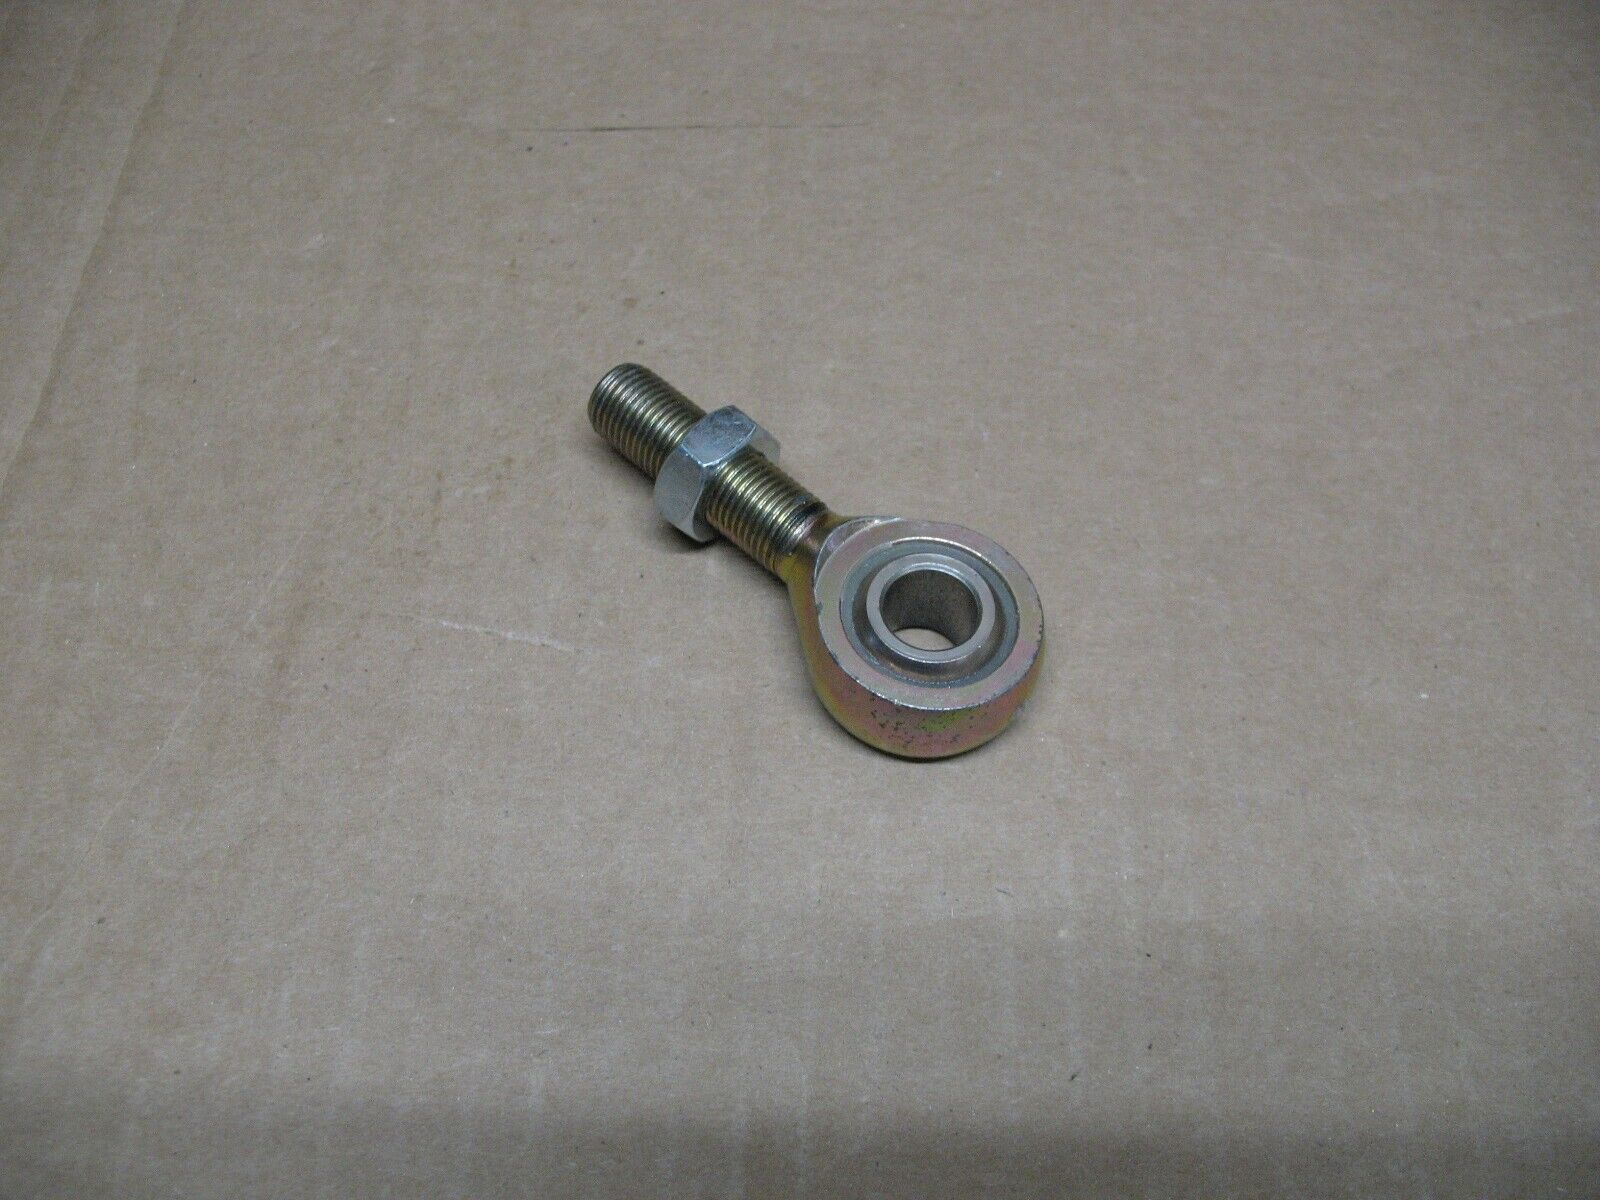 ECON 1/2 x 1/2-20 MALE RH ROD END HEIM JOINT HEIMS Yellow Zinc Coated.